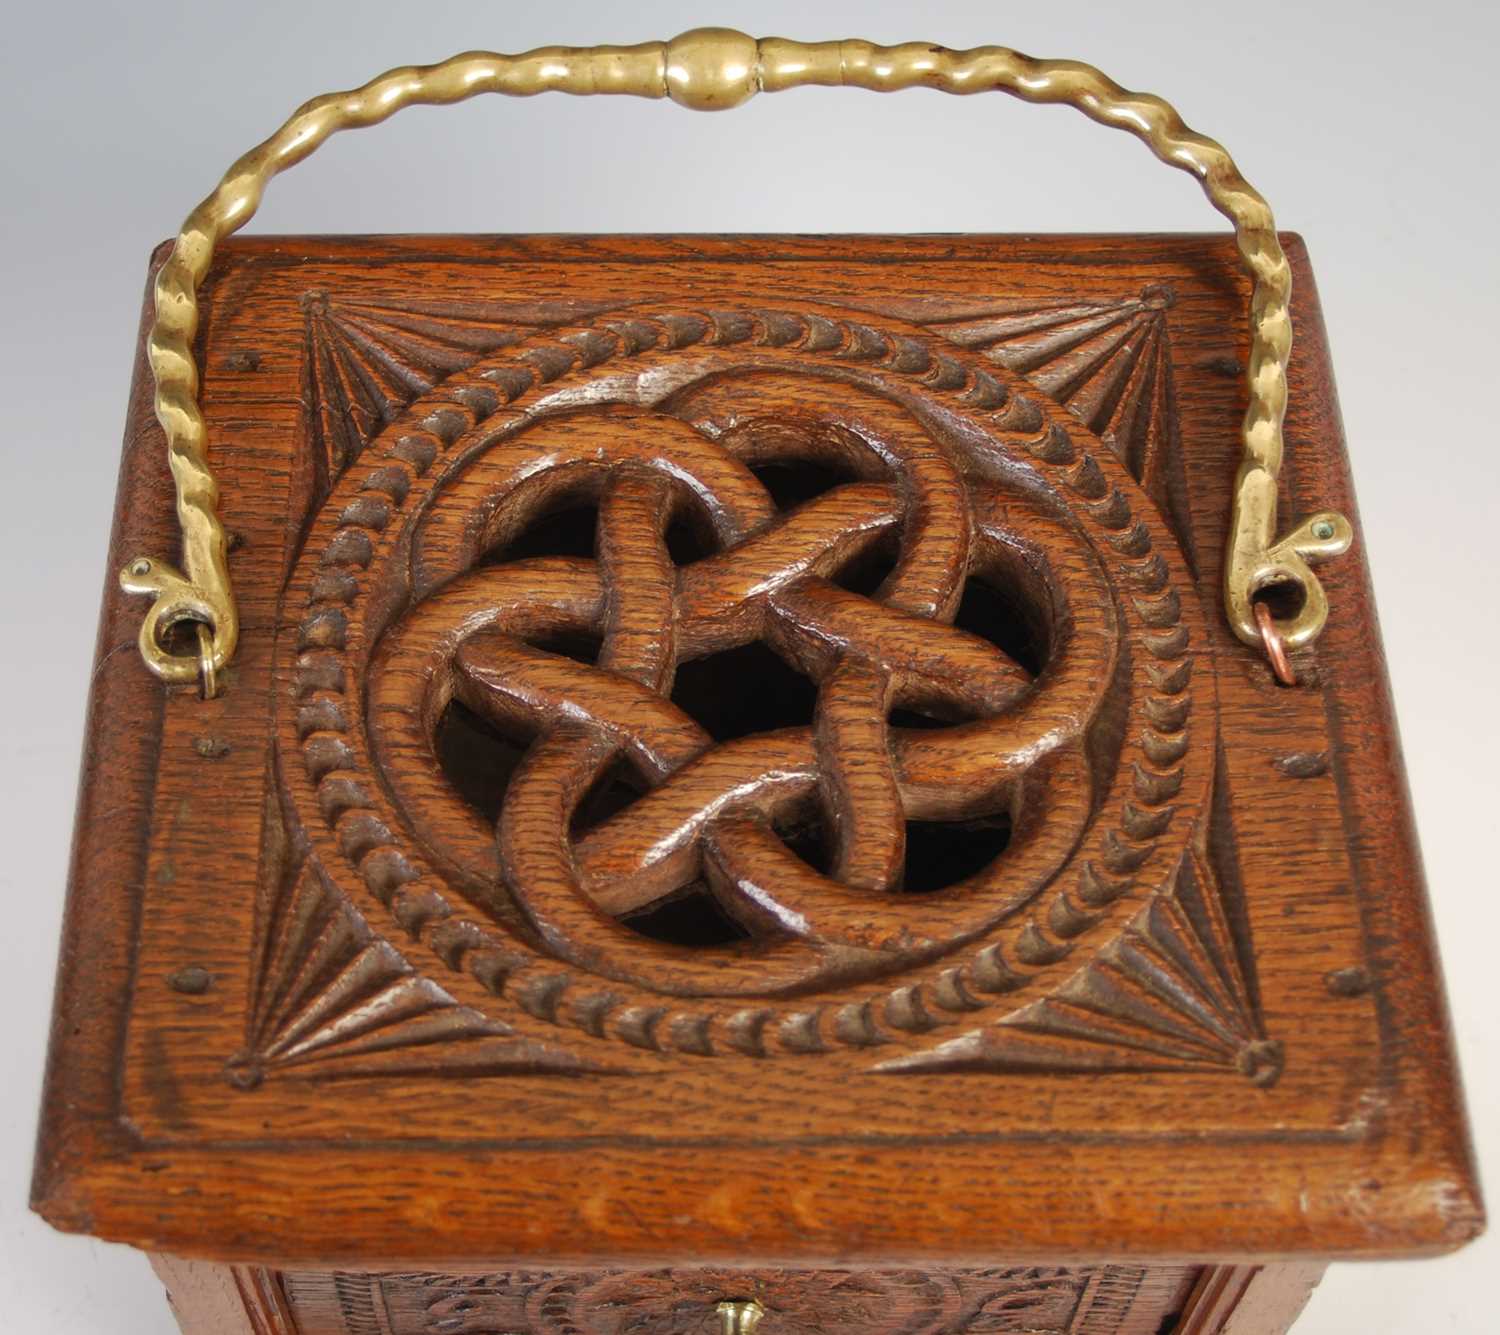 An early 19th century Dutch, Friesland, foot warmer, of rectangular form with top carved and pierced - Image 3 of 4